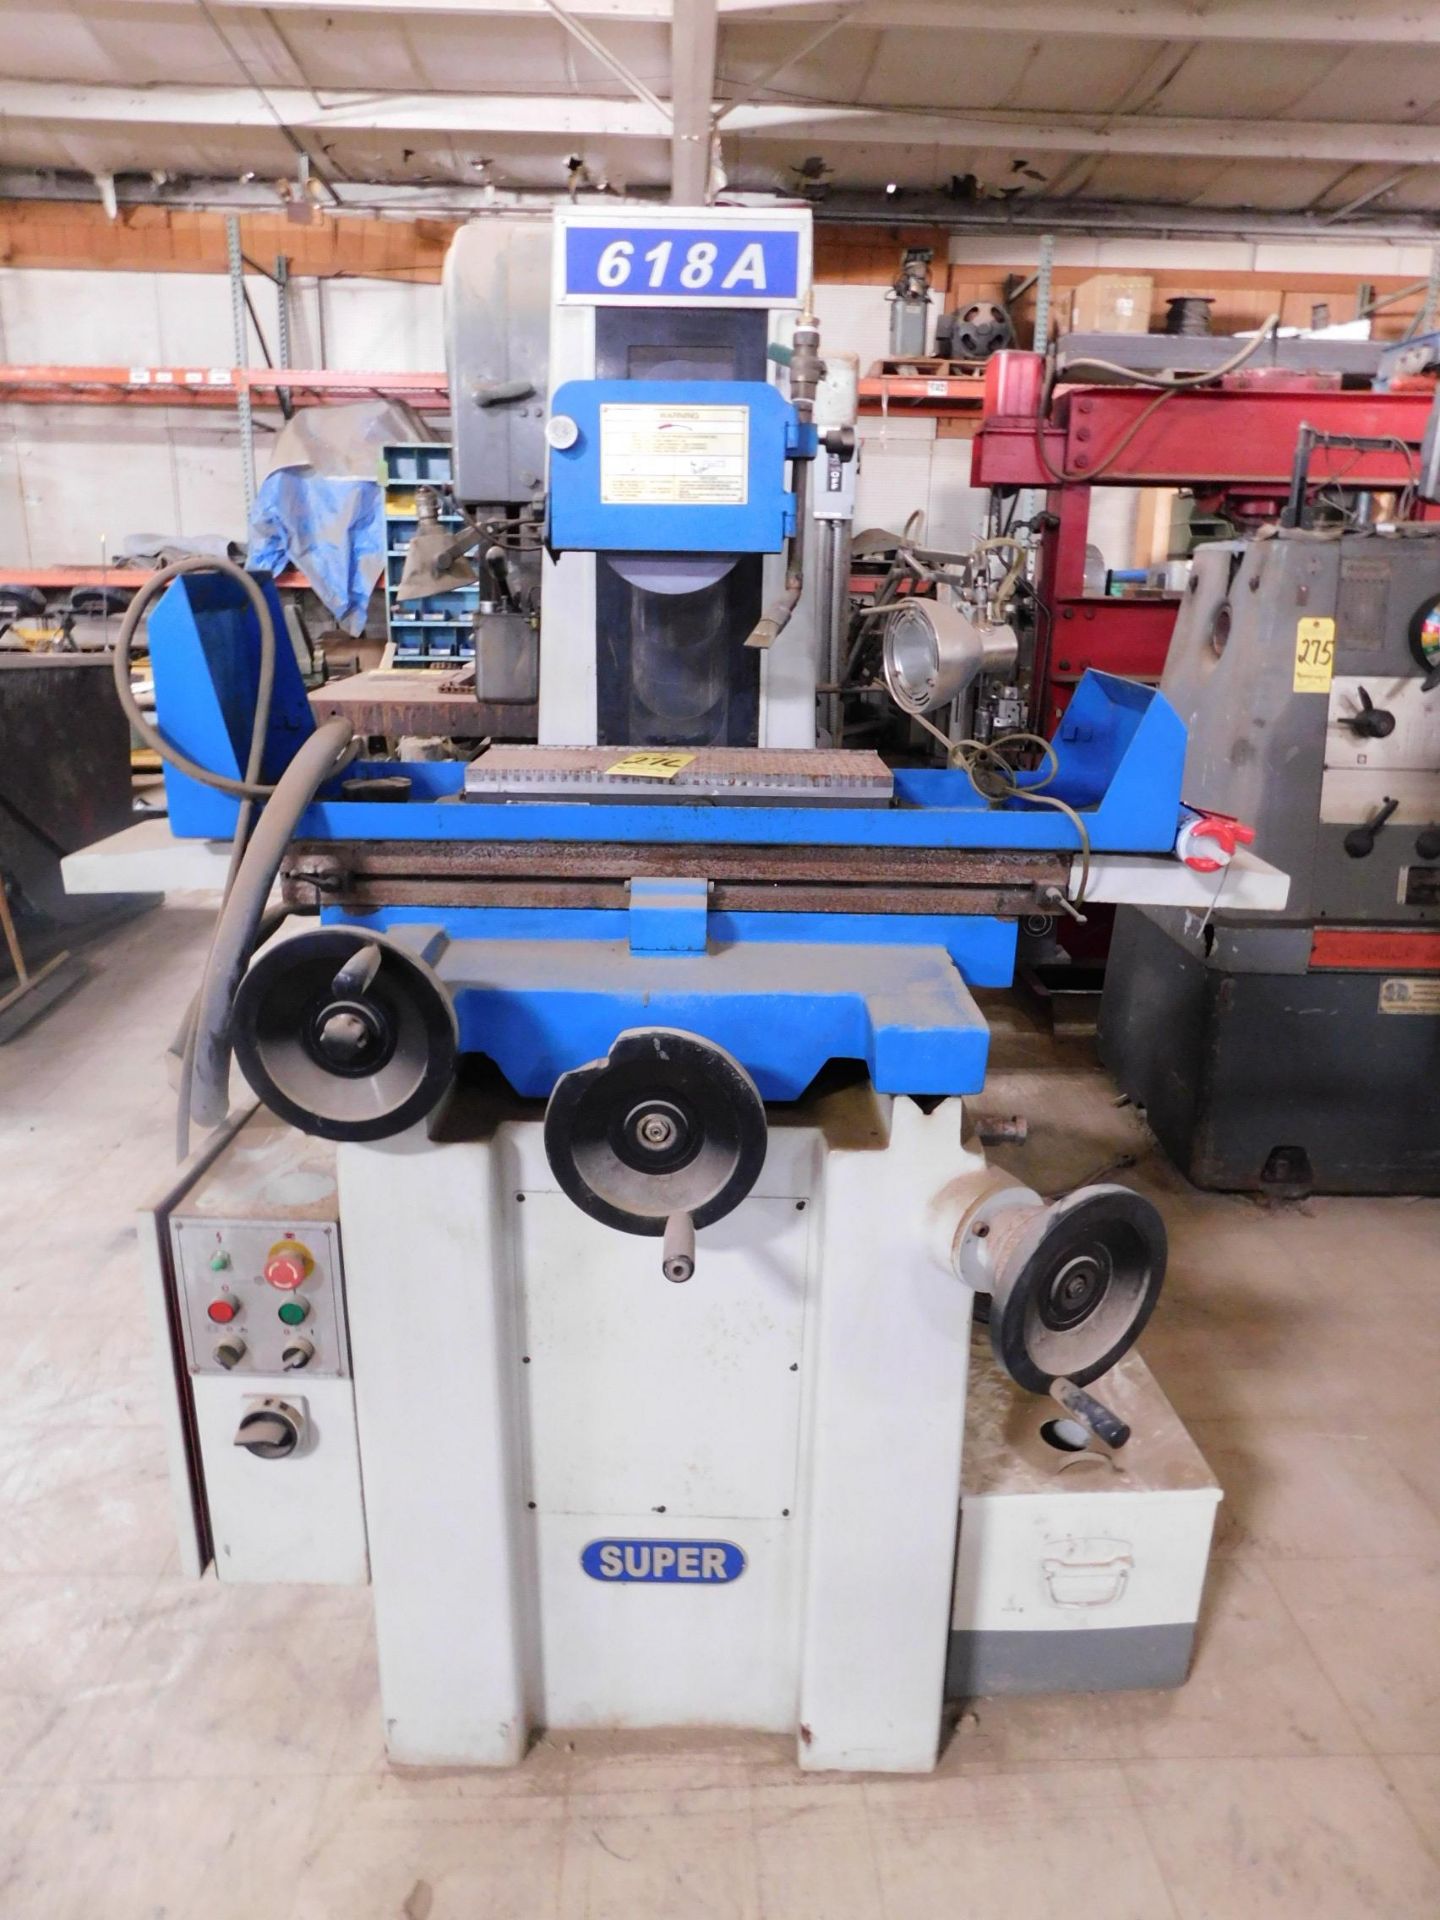 Super 618 A Hand Feed Surface Grinder, New 2006, Walker 6" x 18" PM Chuck, Coolant, SN 06261